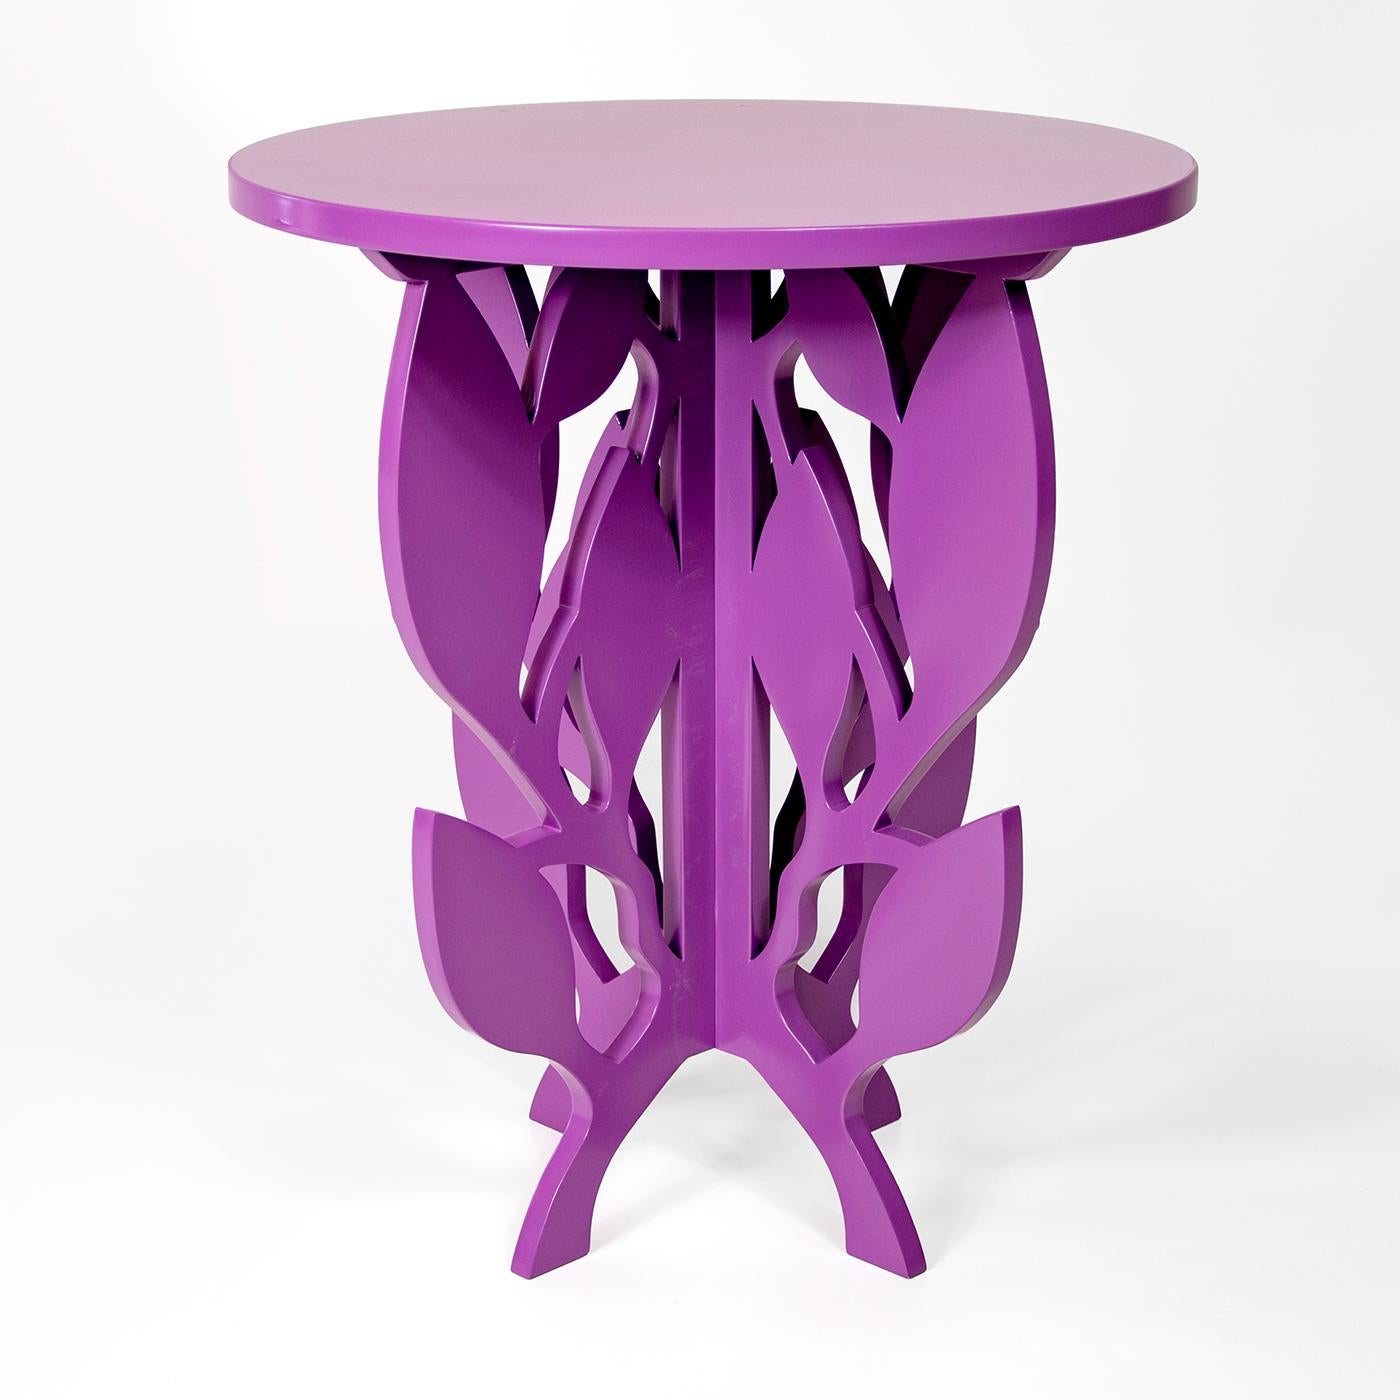 This charming side table immediately conjures the image of romantic elegance, adding an upscale touch to an eclectic living room or a vintage-inspired bedroom. Handcrafted entirely of wood finished in a captivating matte purple, the leaf motif of